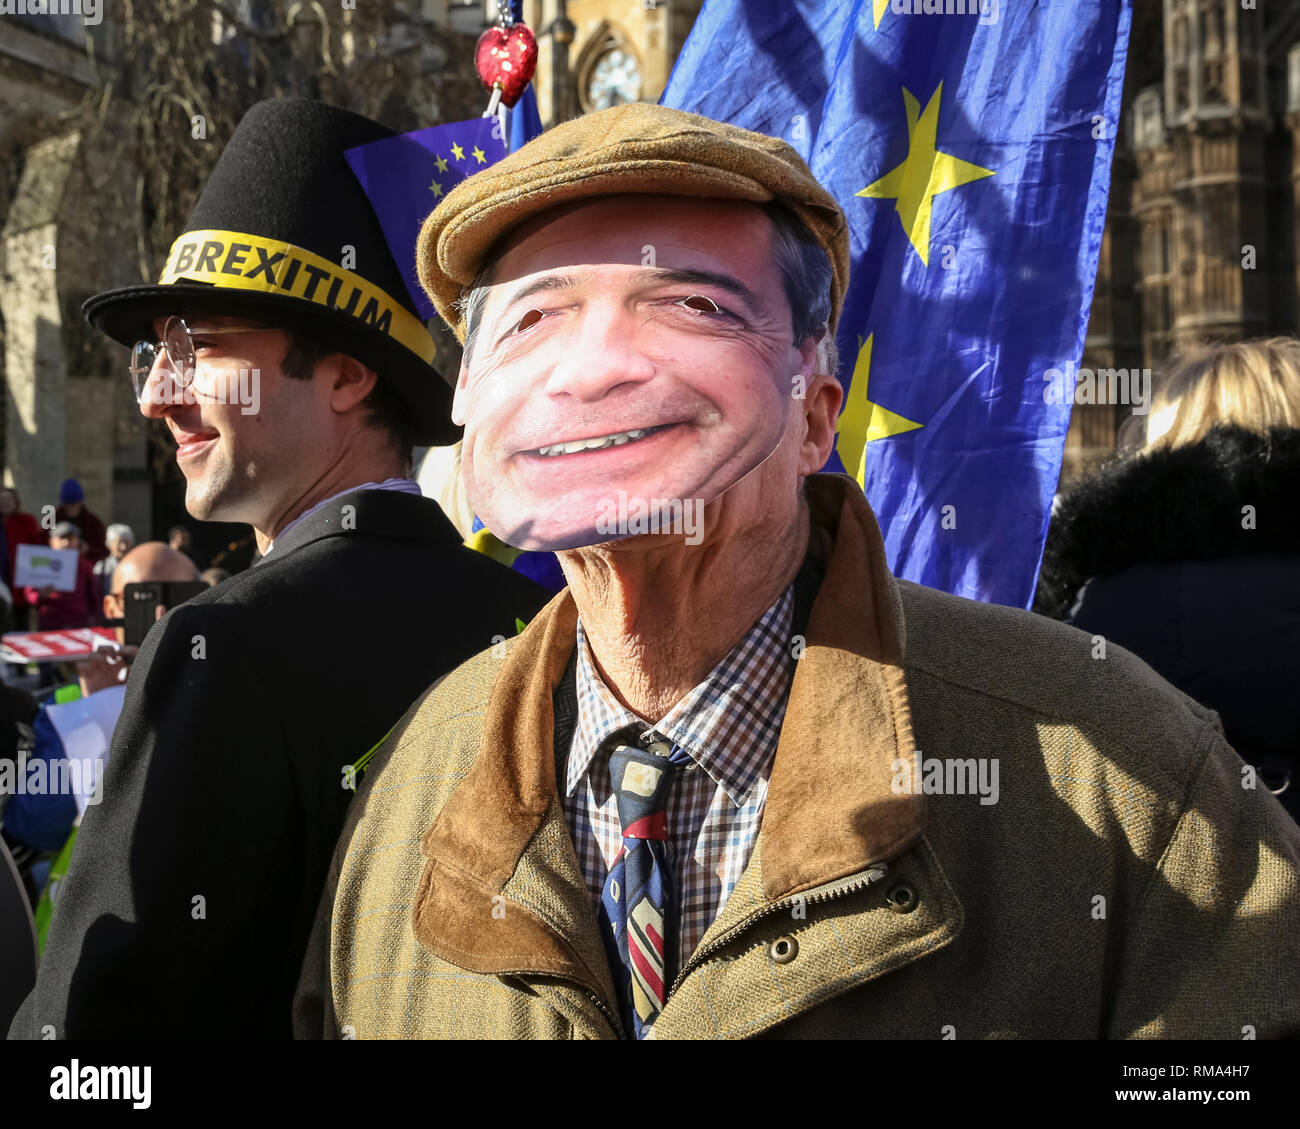 Westminster, London, UK. 14th Feb, 2019. Fake Farage visits the site. Remainers have organised a 'Fake Politicians' car, including Faux Bojo, Facob Rees-Mogg, a Fake Farage, a puppet of Theresa May, and a 'Devil'. They are joined by 'EU Supergirl' Madeleina Kay (left) Pro- and anti-Brexit protesters rally, wave flags and hold placards outside the Houses of Parliament and near the College Green media platforms in Westminster. Many have turned up in costumes and colourful outfits to get their message across. Credit: Imageplotter News and Sports/Alamy Live News Stock Photo